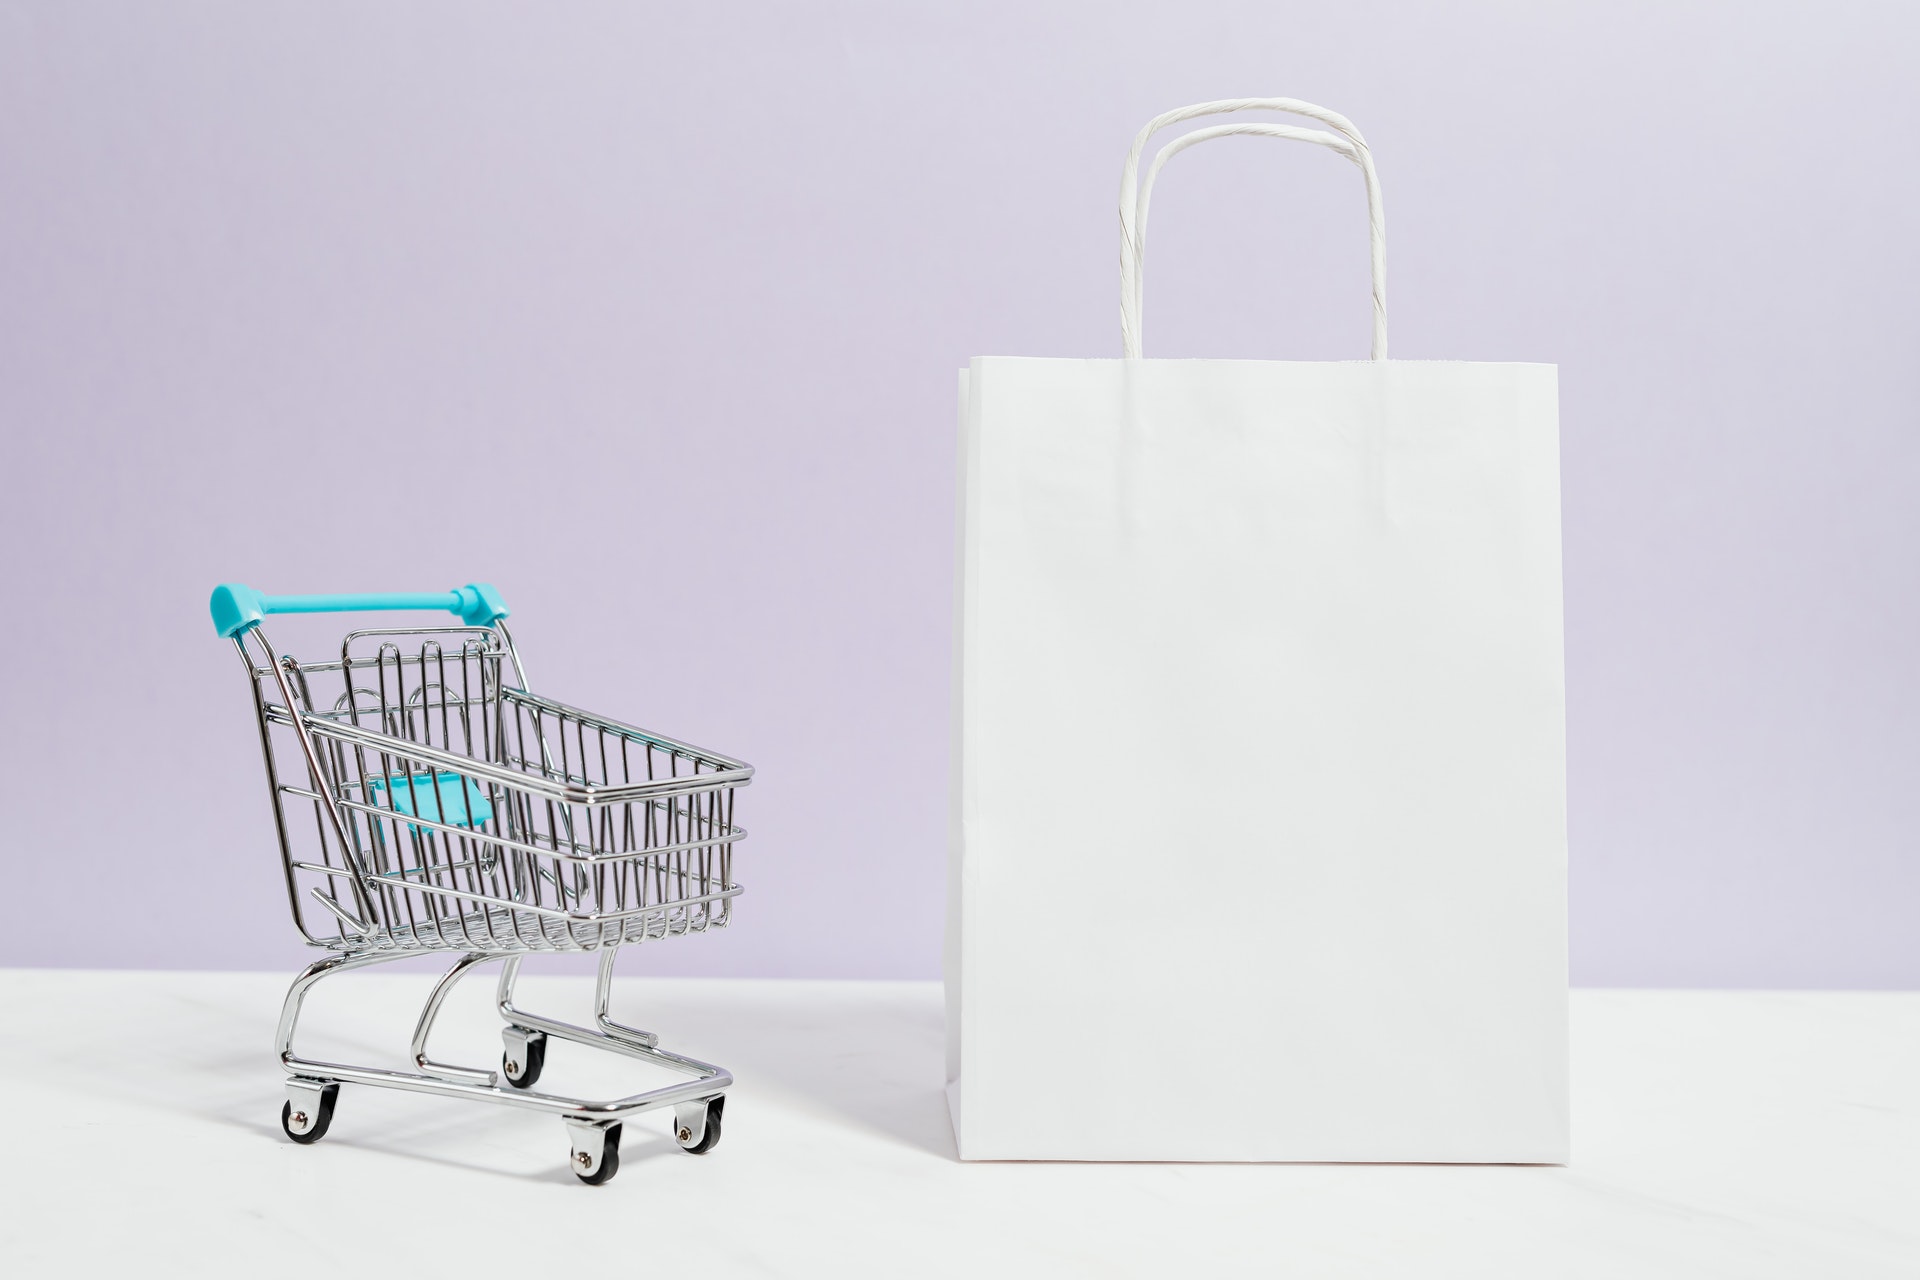 A small cart and a white bag